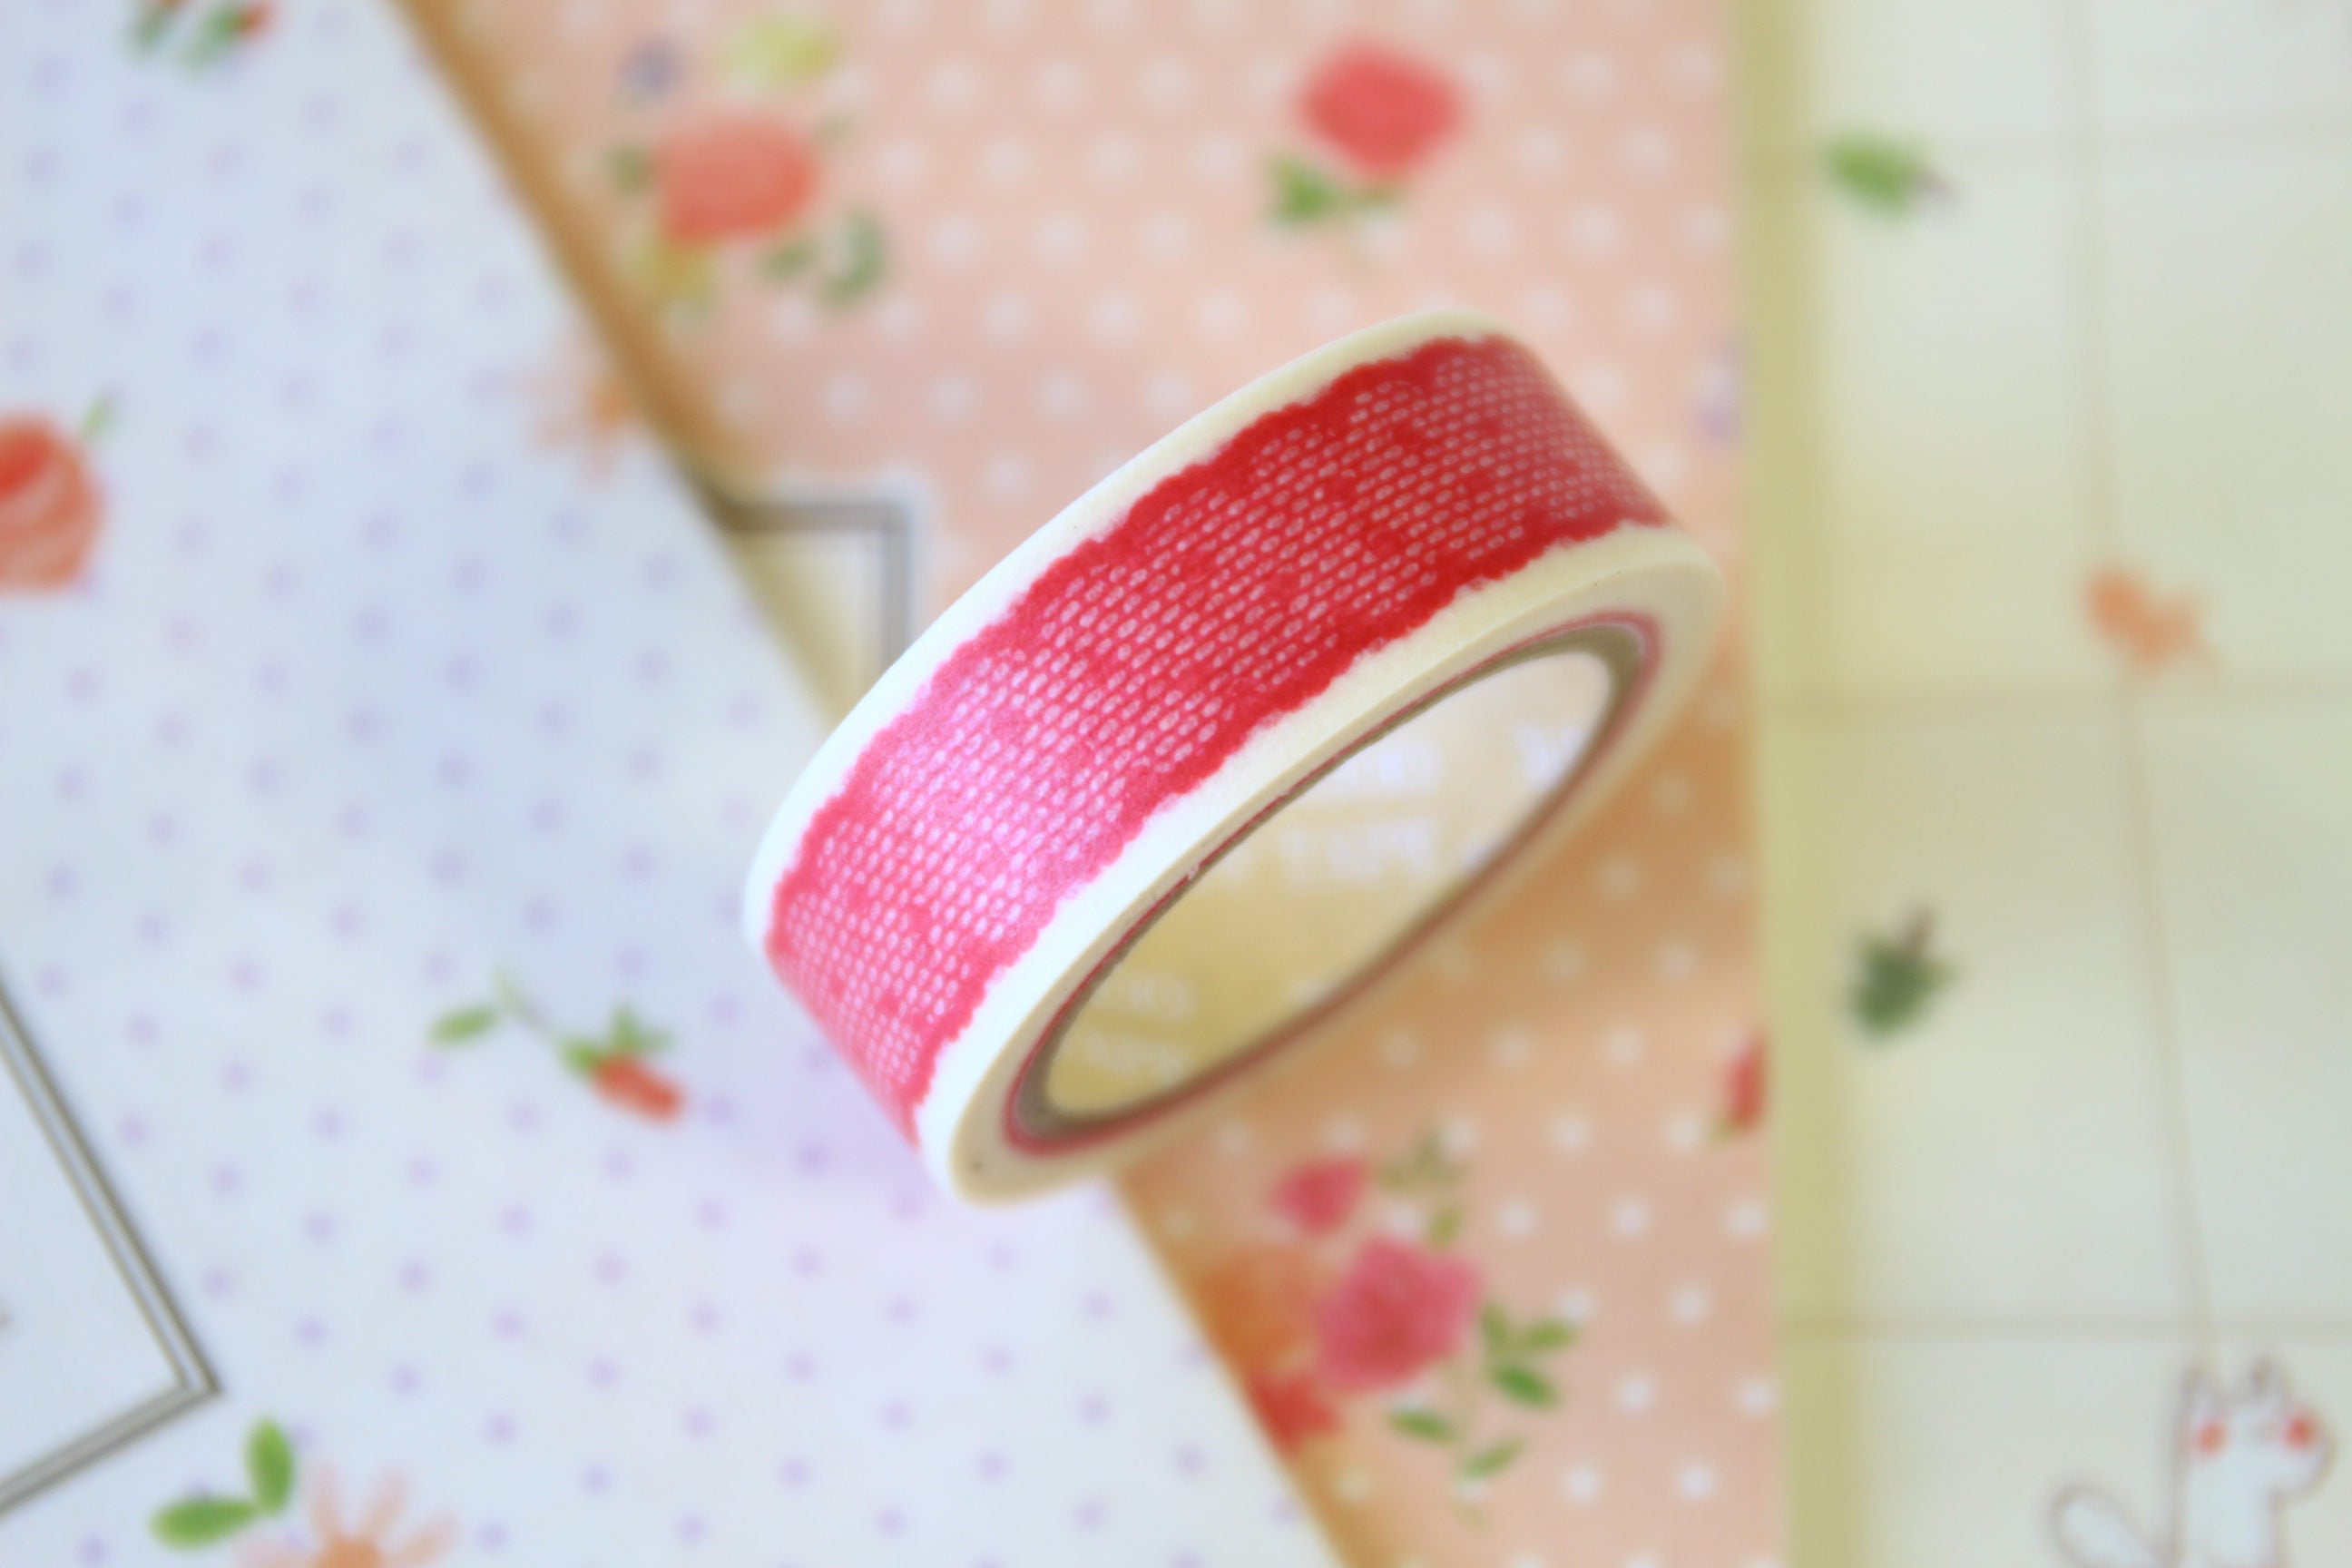 Lace Adhesive Tape [Beige]